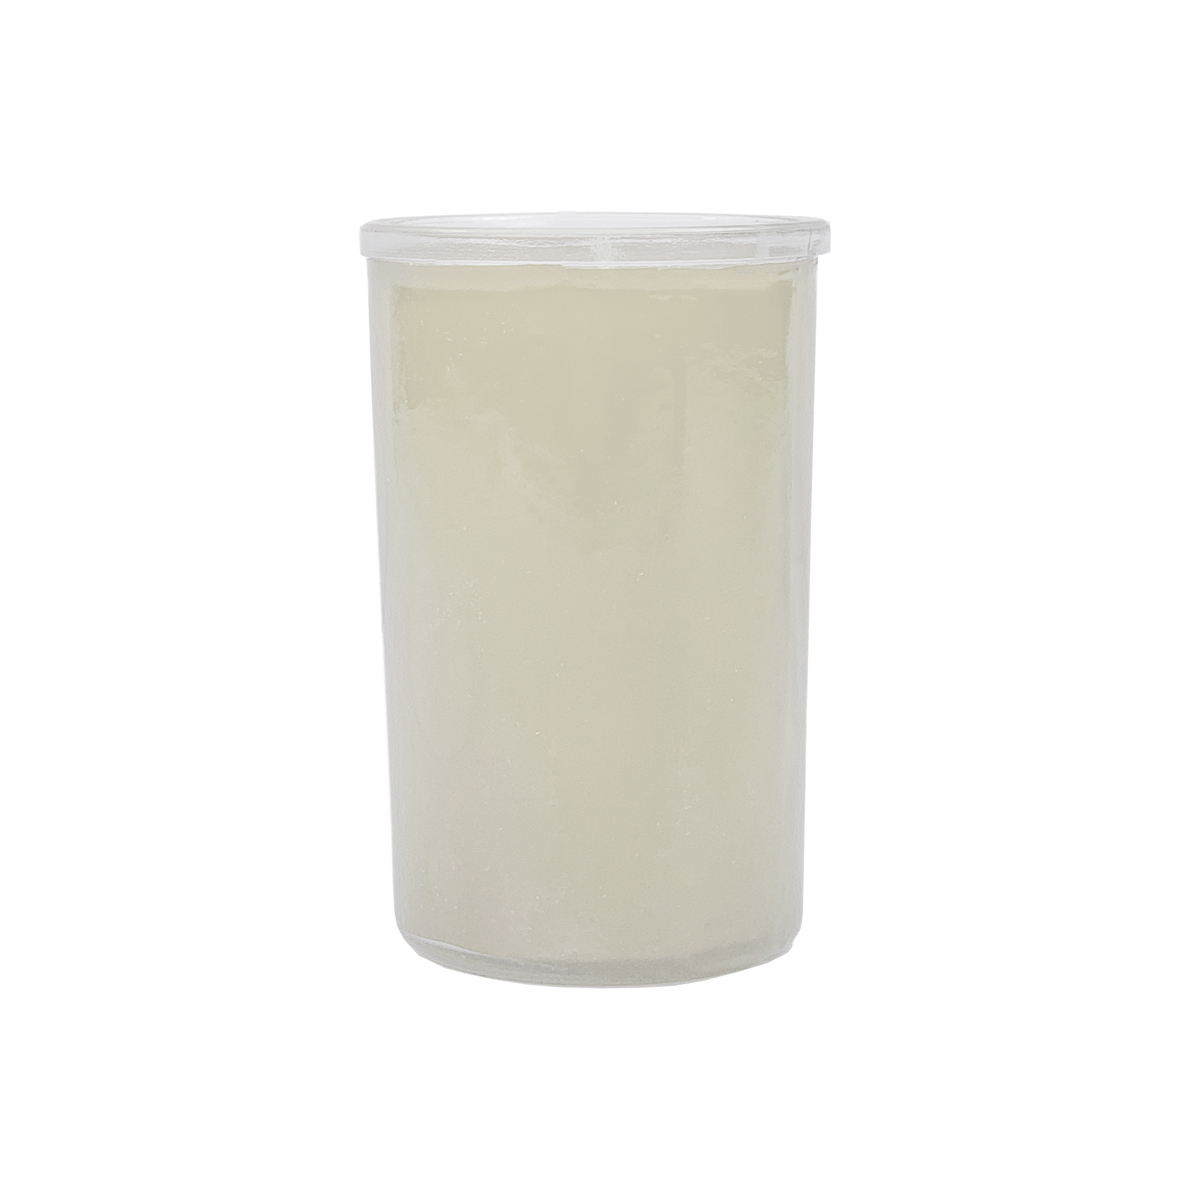 CLEAR 36-HOUR REFILL CONTAINER CANDLE